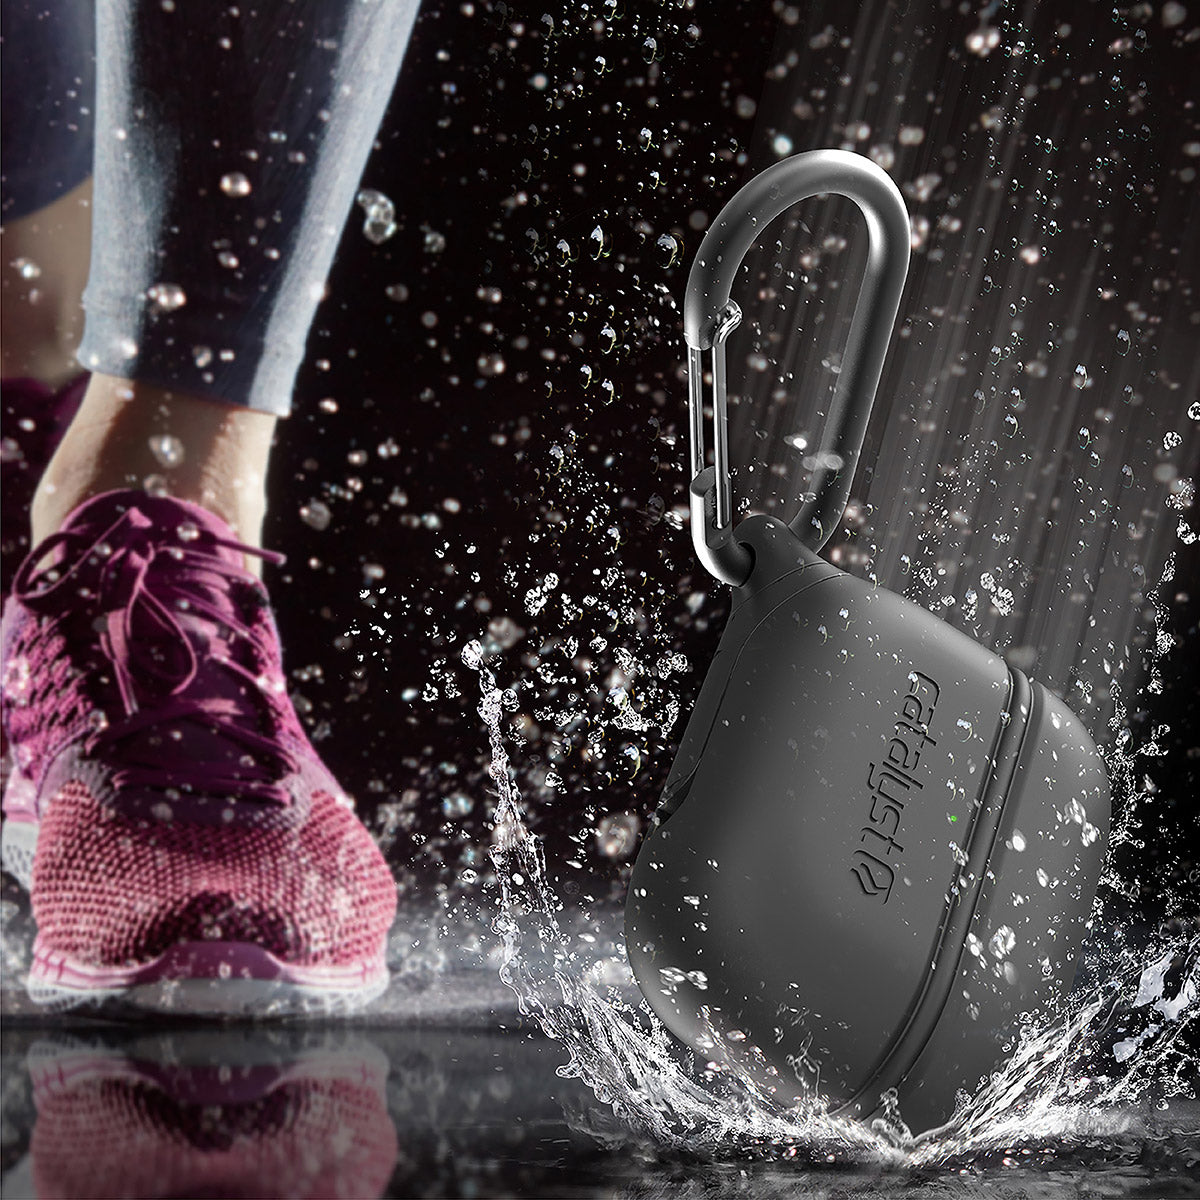 CATAPLAPDPROBLK | catalyst airpods pro gen 2 1 waterproof case carabiner special edition black dropped and splashes of water running shoes